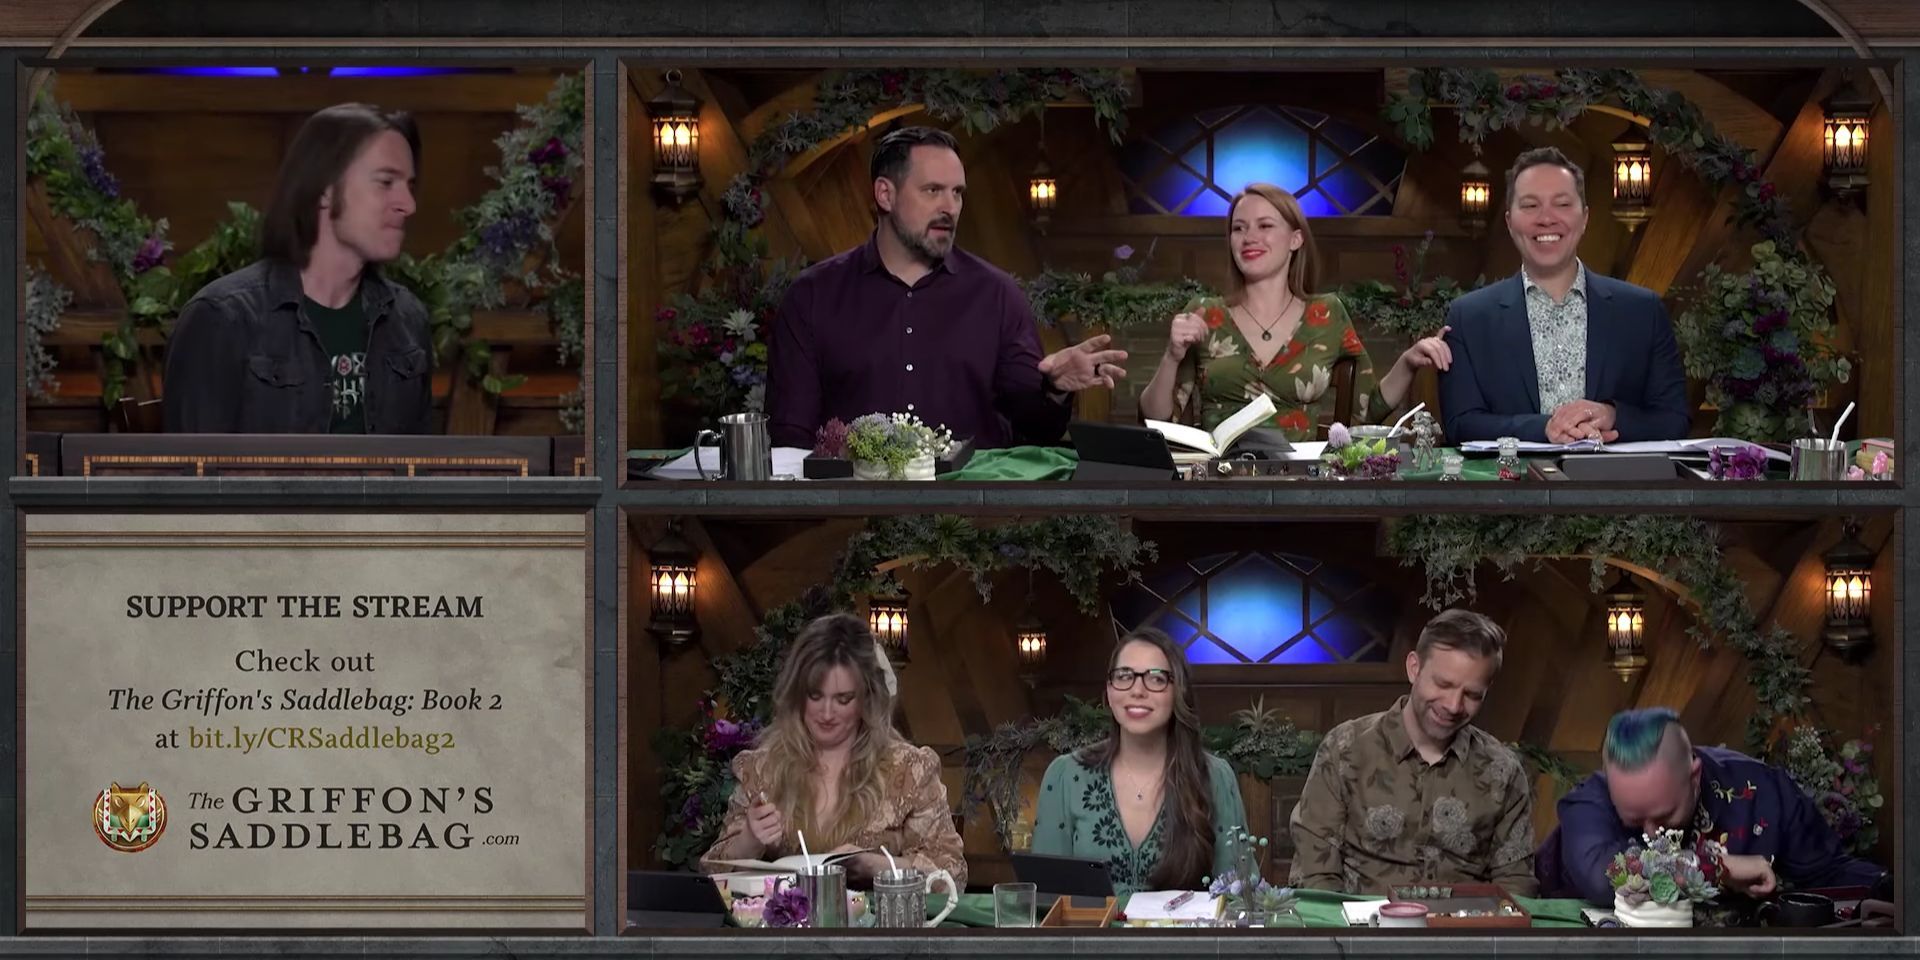 Matt Mercer starts to leave as Travis begins talking about alpha males in Critical Role